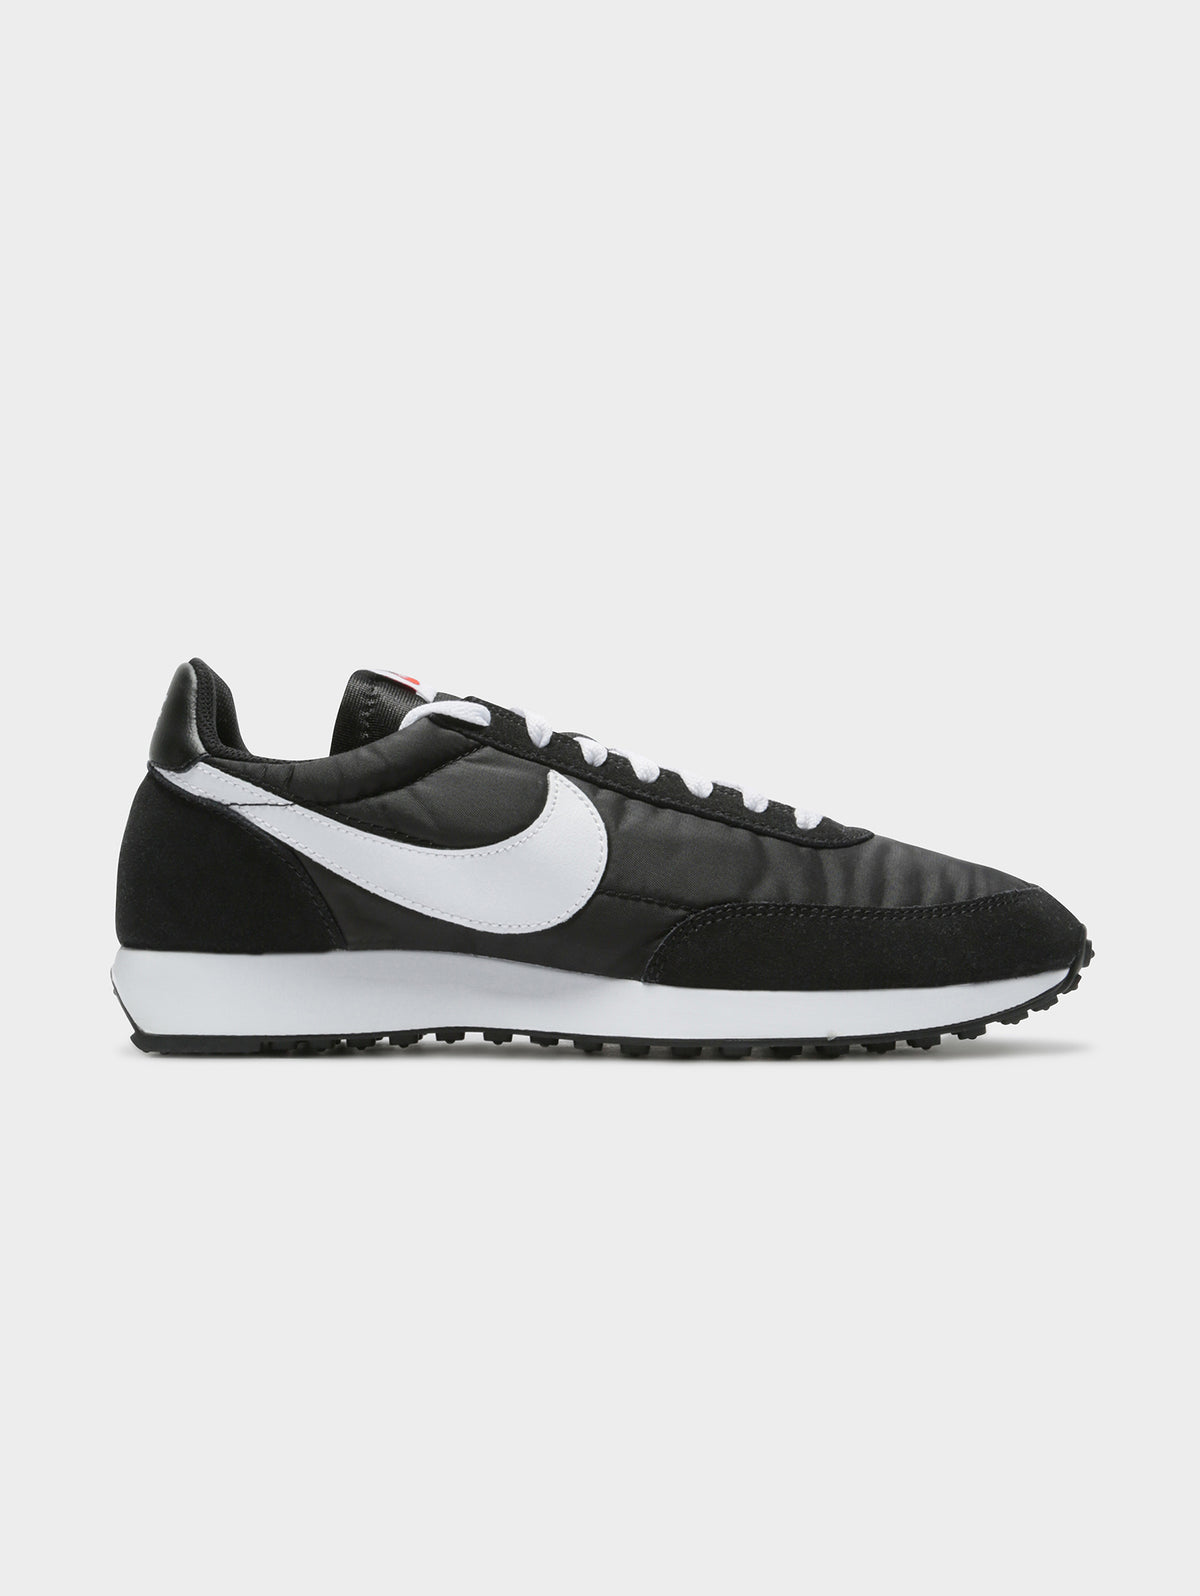 Unisex Air Tailwind 79 Sneakers in Black &amp; White